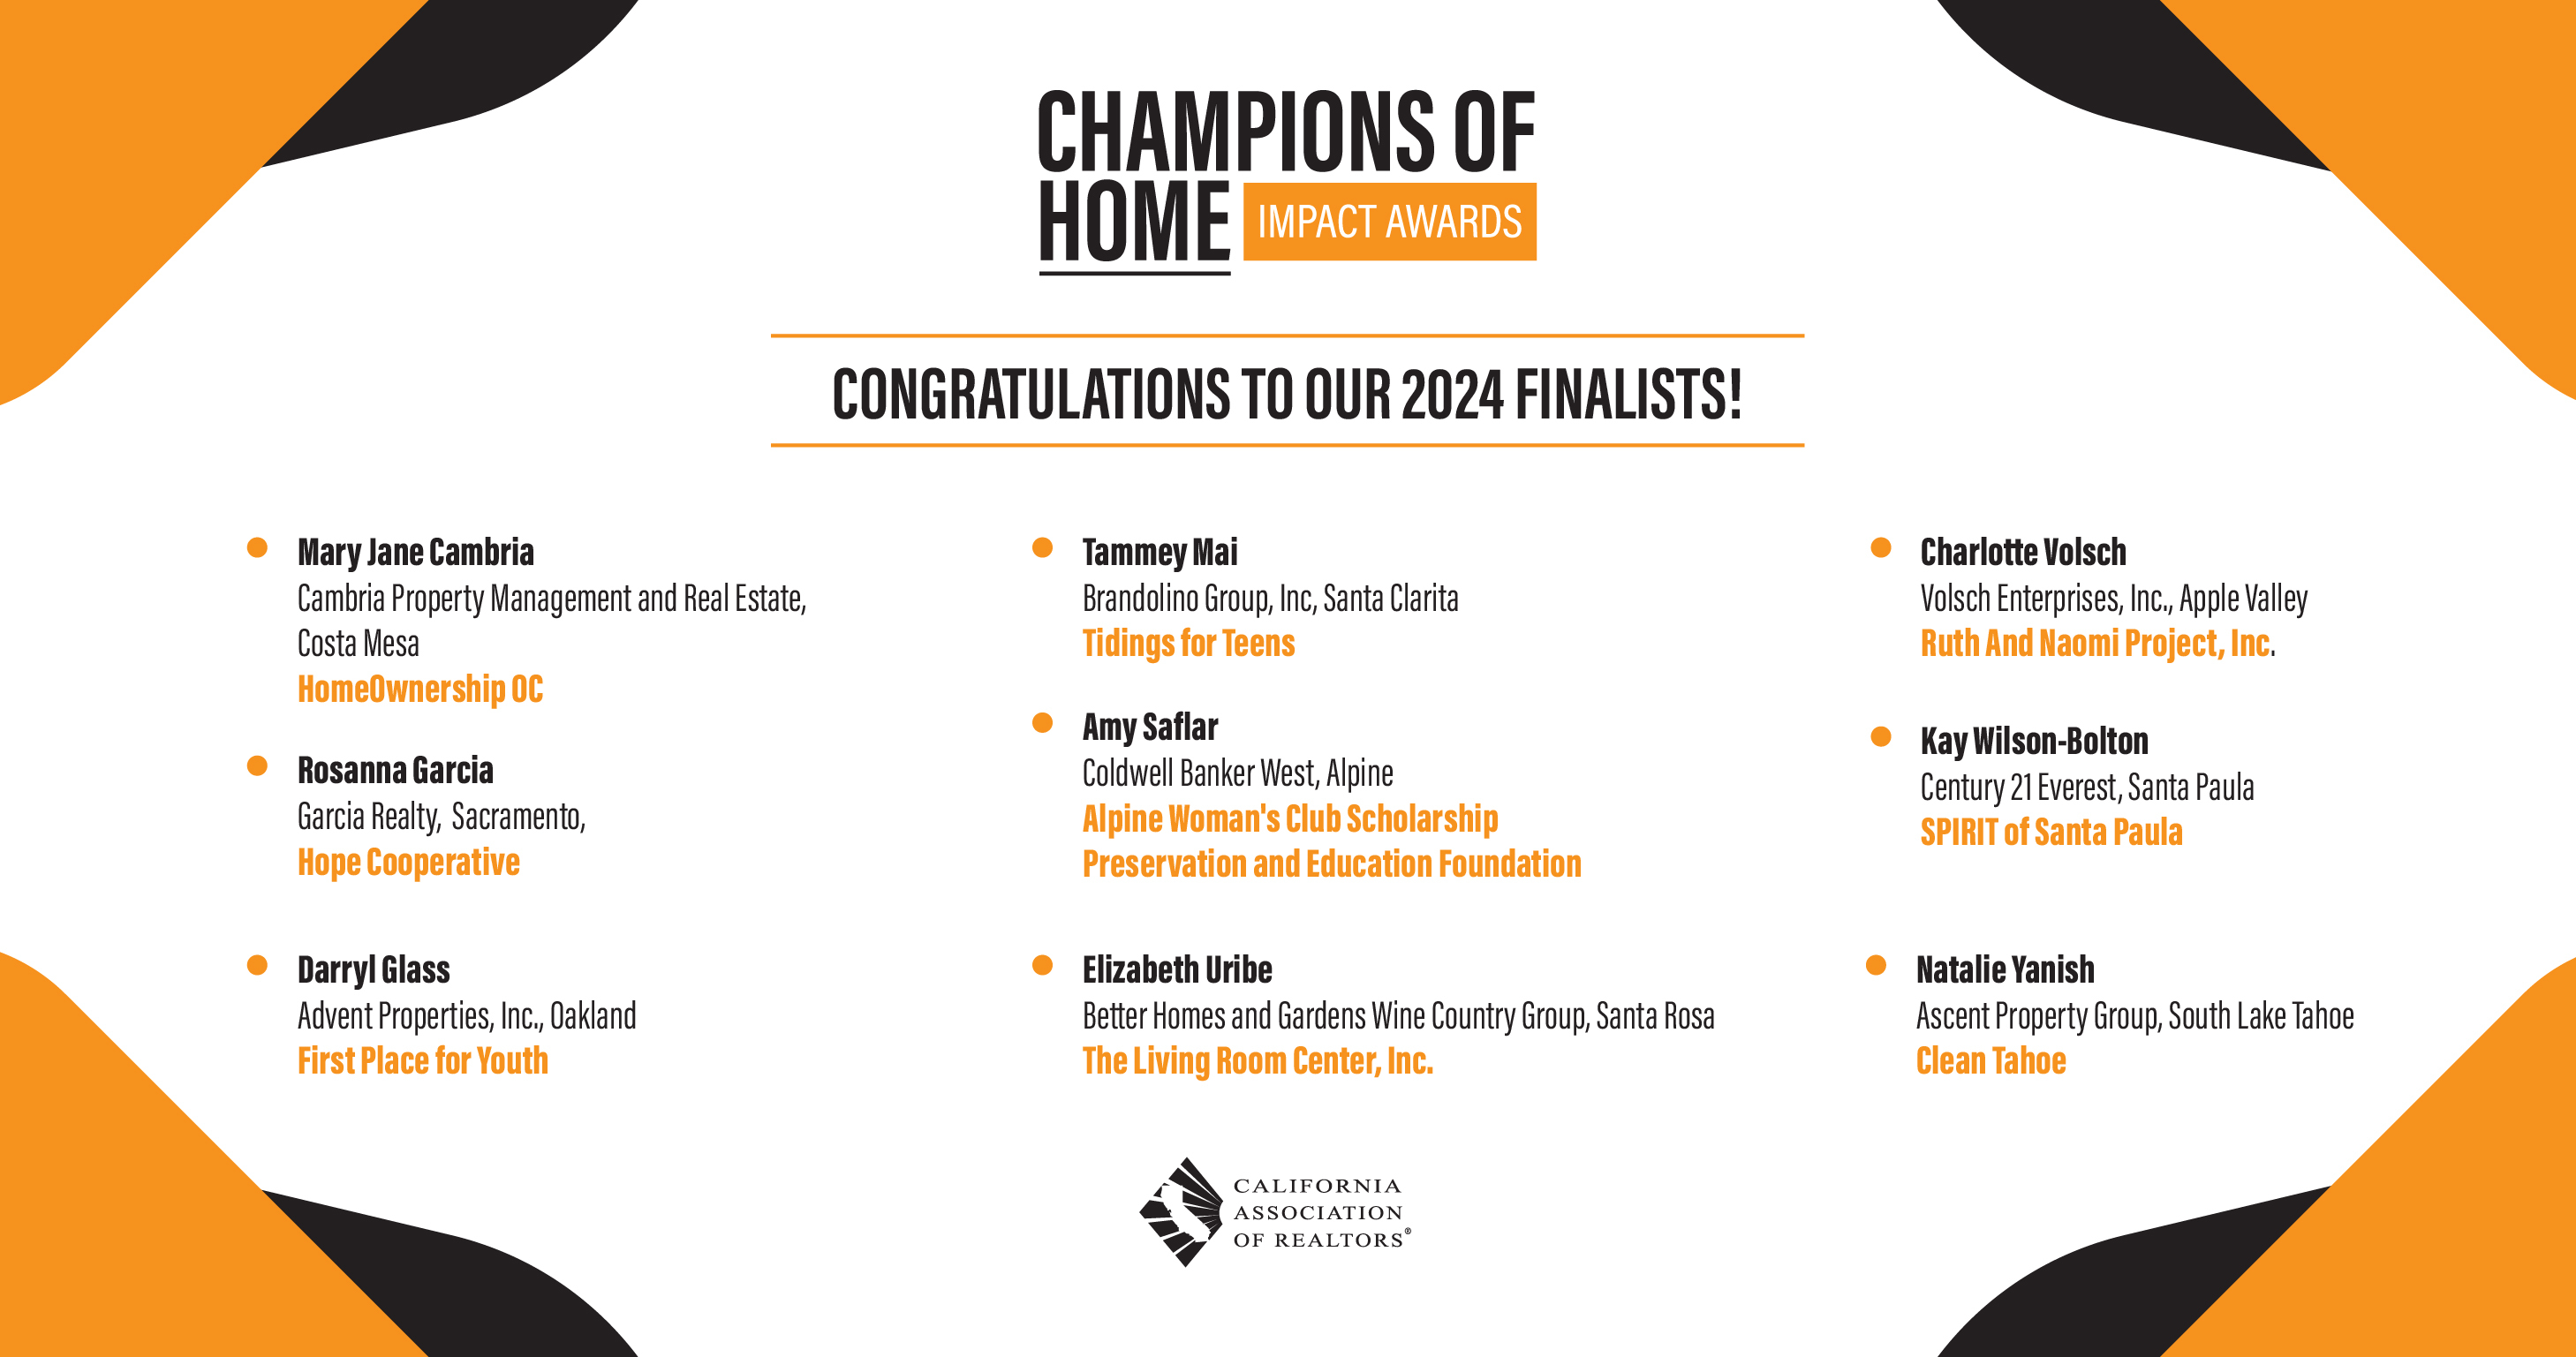 2024 Champions of Home Impact Awards Finalists